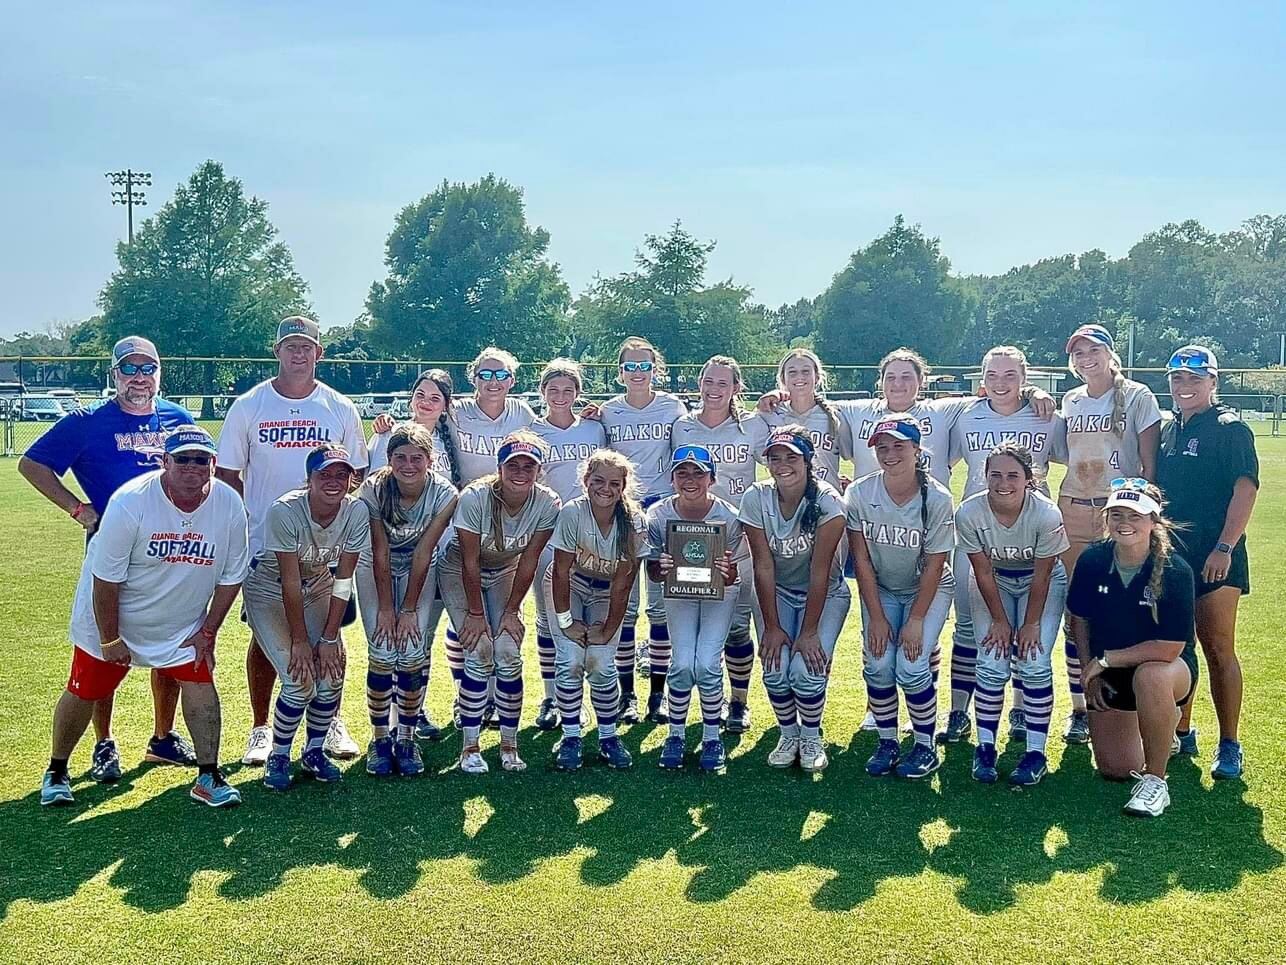 Orange Beach will be searching for a third straight state title after it earned a qualification to the Class 4A championship tournament with a runner-up finish in the South Regional championships in Gulf Shores last weekend. The Makos are set to open the state bracket Friday against White Plains.